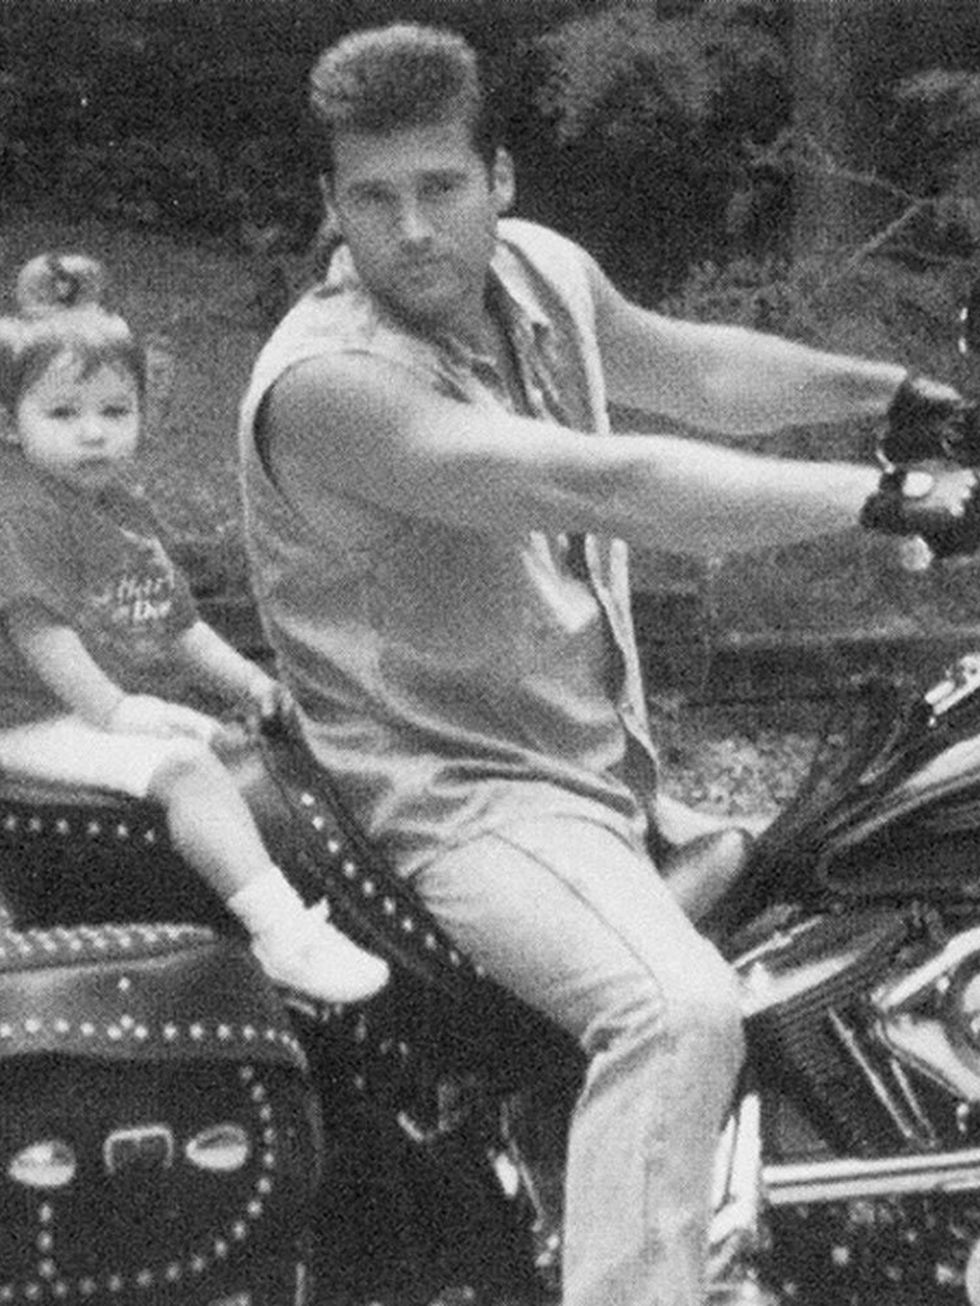 Billy Ray Cyrus
(@billyraycyrus)
'With @MileyCyrus in our Nashville driveway before taking a ride on my @harleydavidson. #tbt'